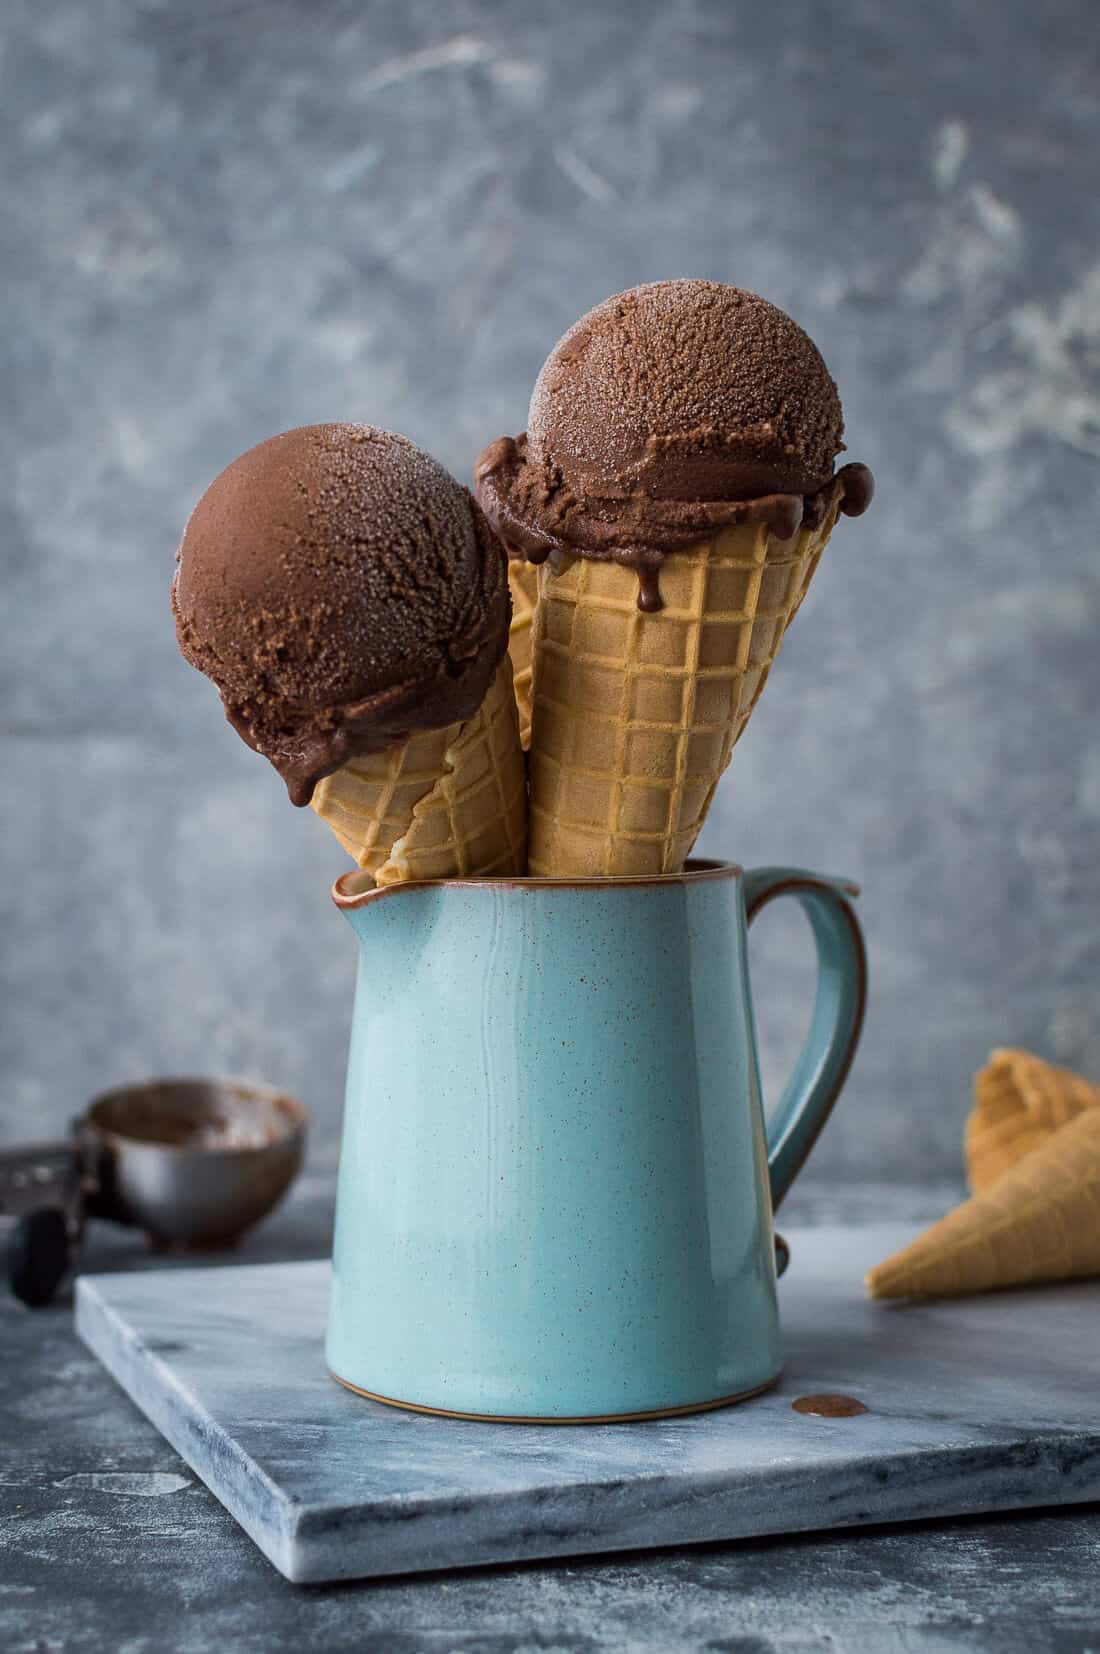 Chocolate coconut sorbet - rich and chocolatey but lighter than a traditional ice cream; this vegan chocolate coconut sorbet is an easy to make, refreshing treat. #vegan #sorbet #coconut #chocolate #dairyfree